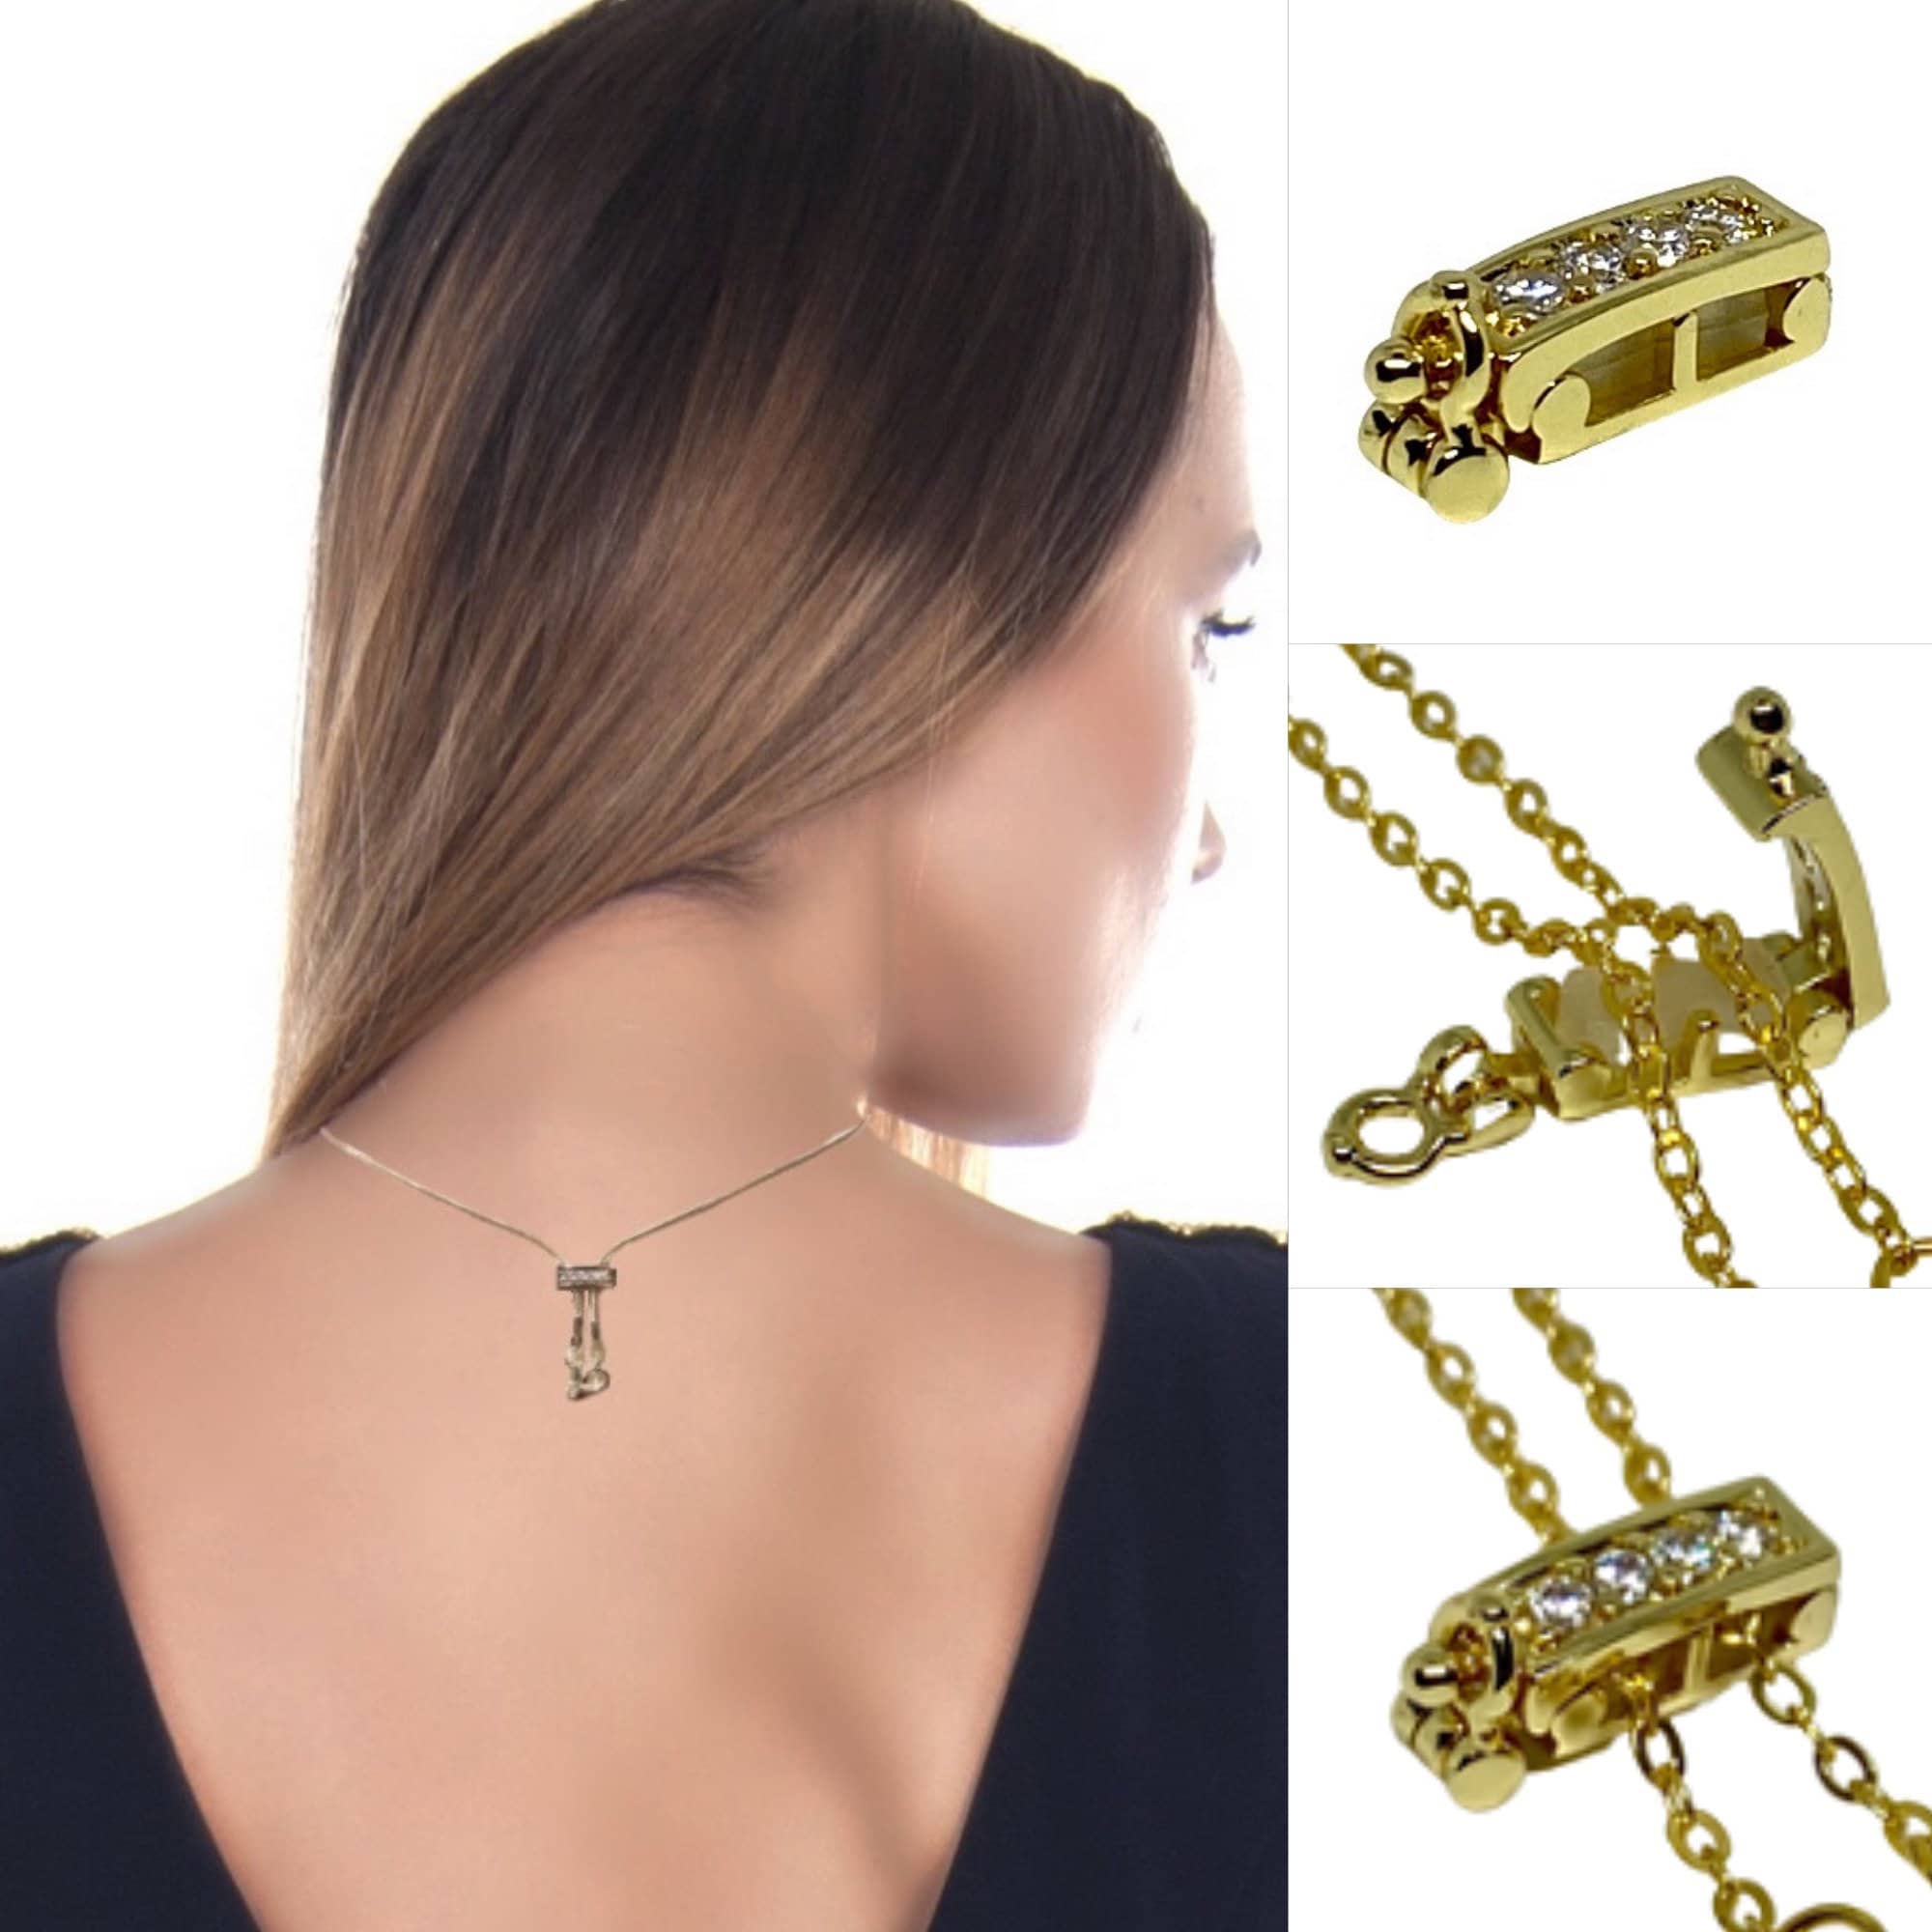 Infinity Clips 3 Piece Large Set Necklace Chain Shorteners W/ 